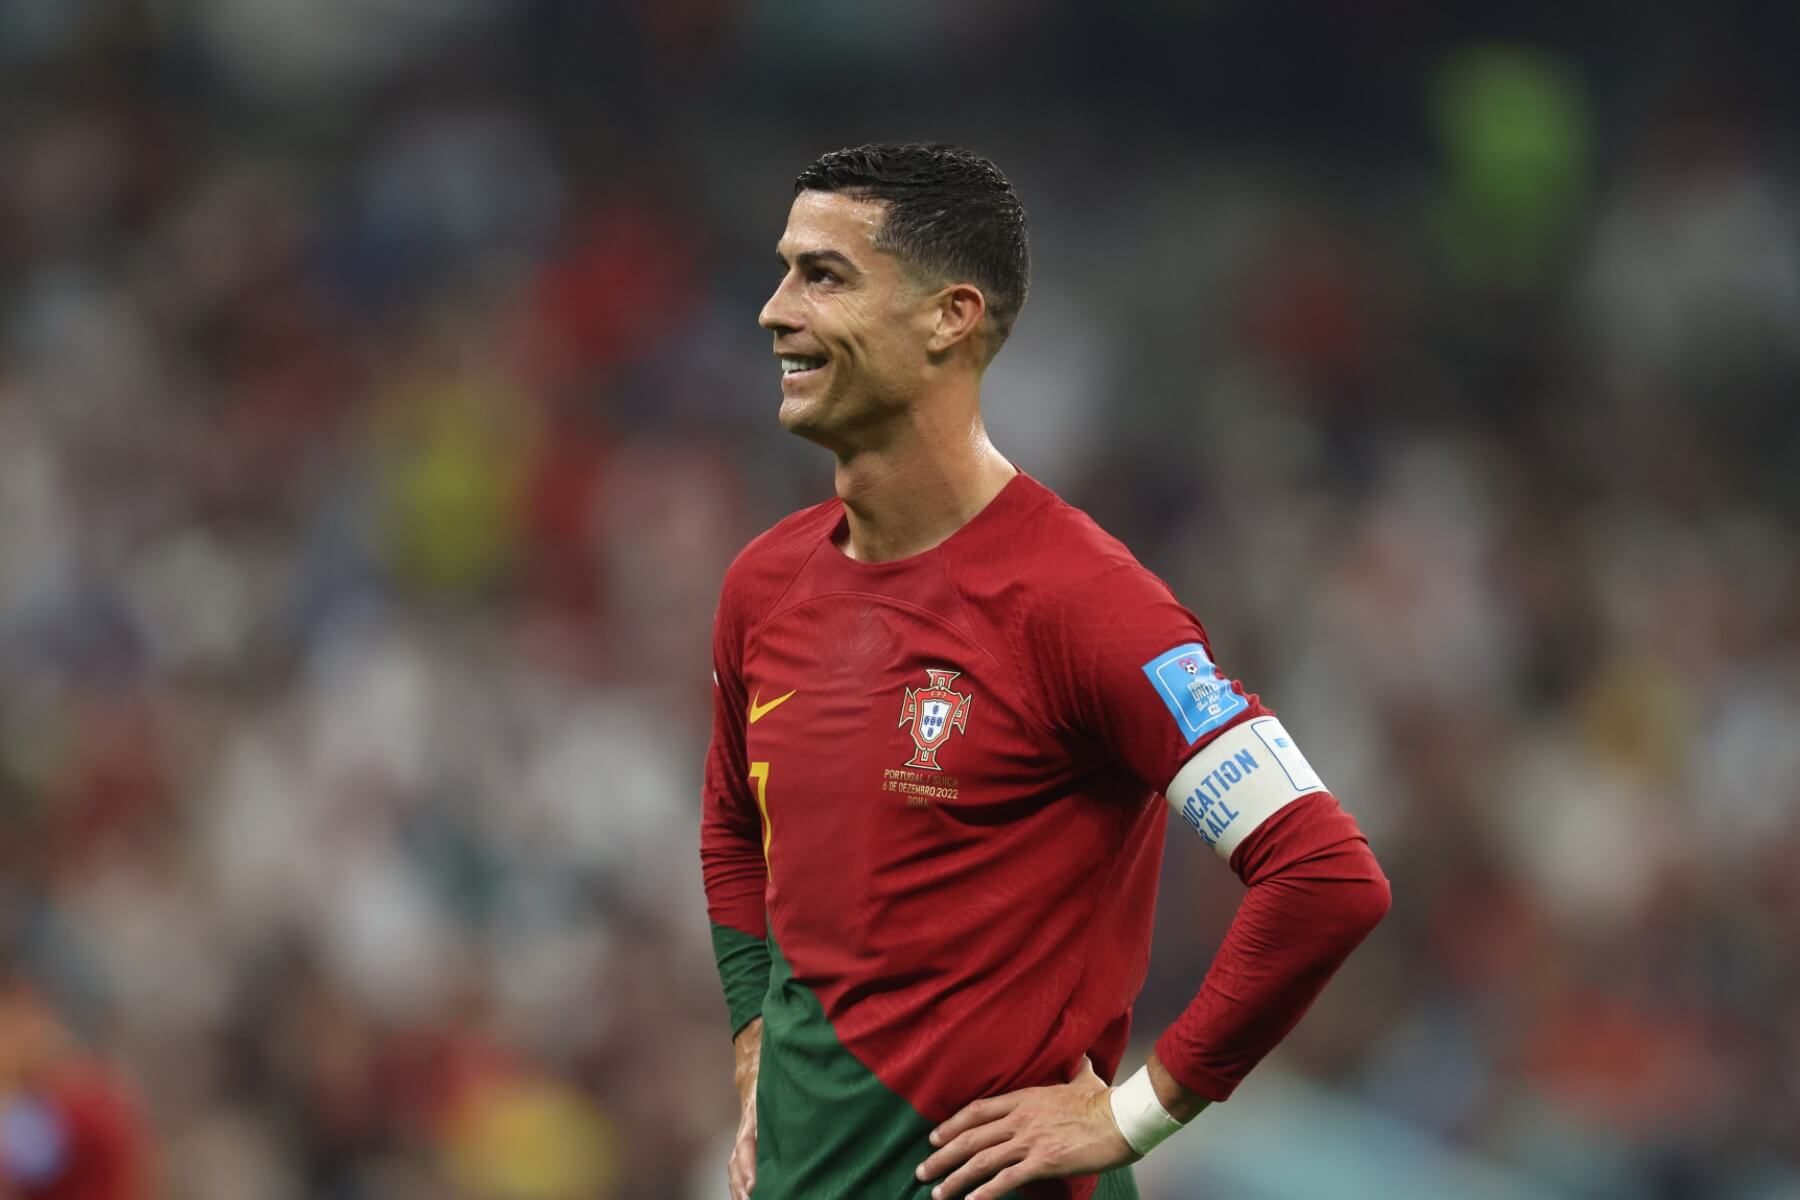 Ronaldo says the Portuguese team is too united to be broken apart by outside forces